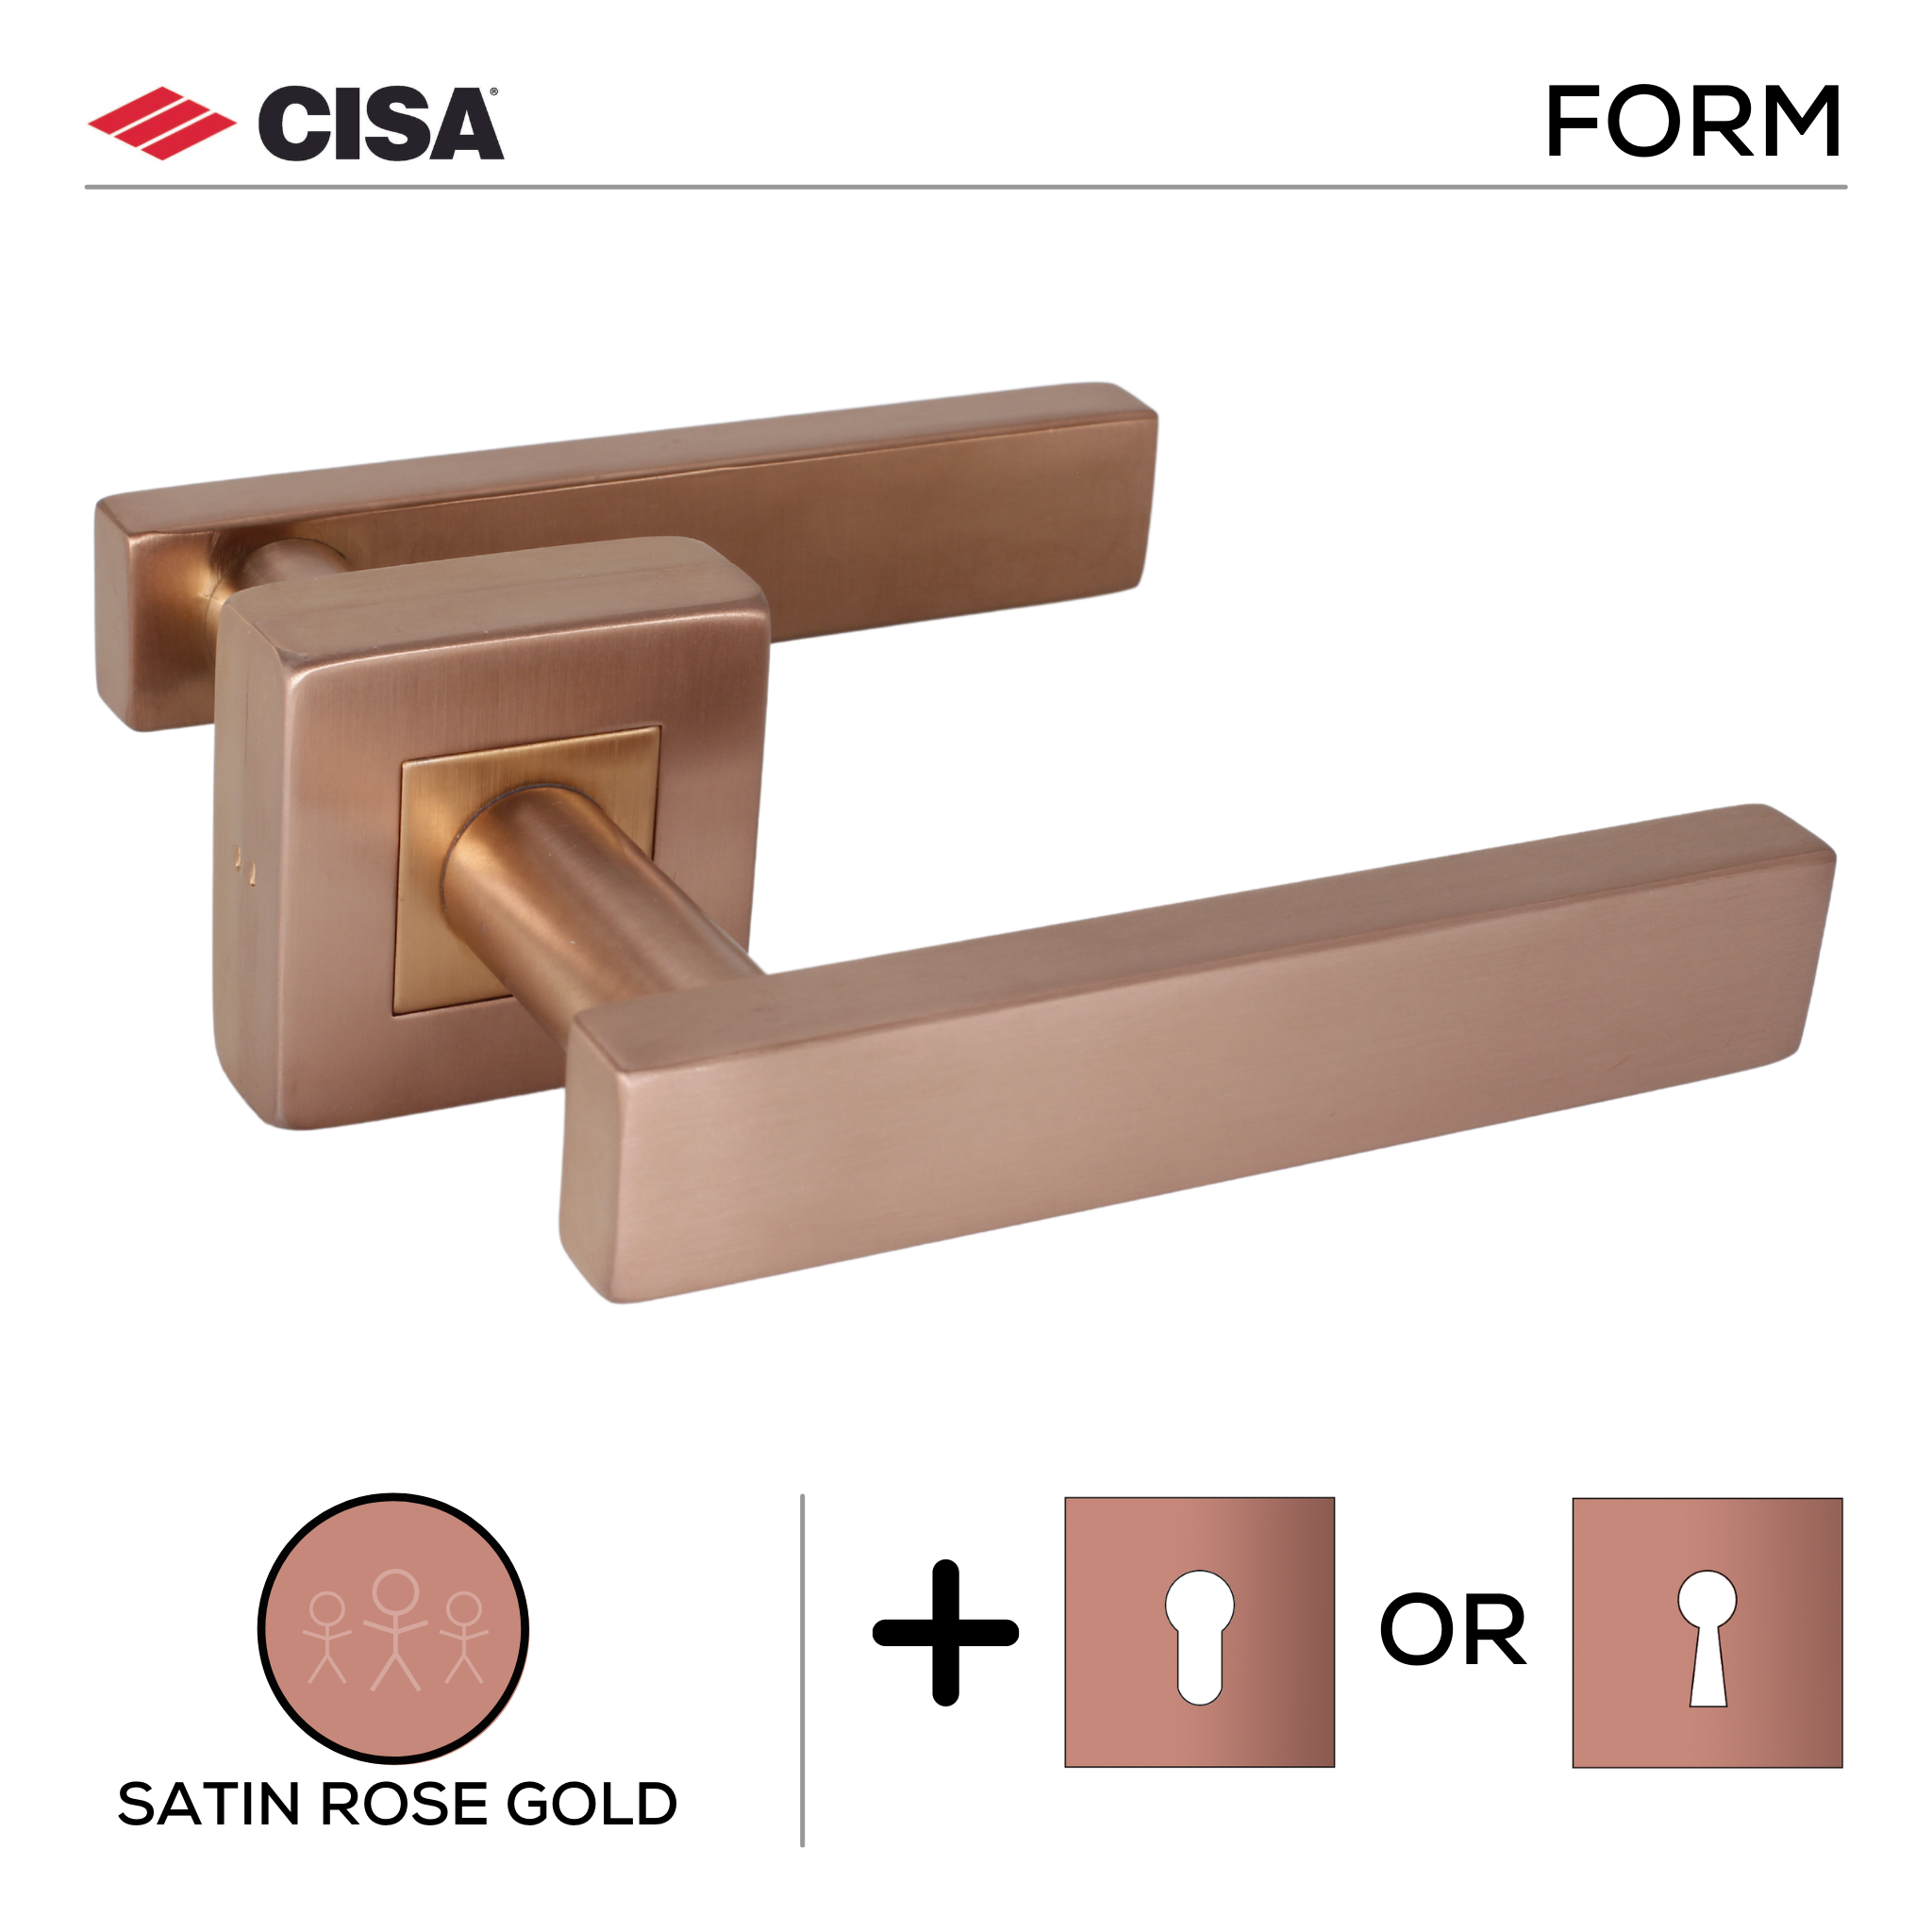 FS202.S._.SRG, Lever Handles, Form, On Square Rose, With Escutcheons, Satin Rose Gold, CISA